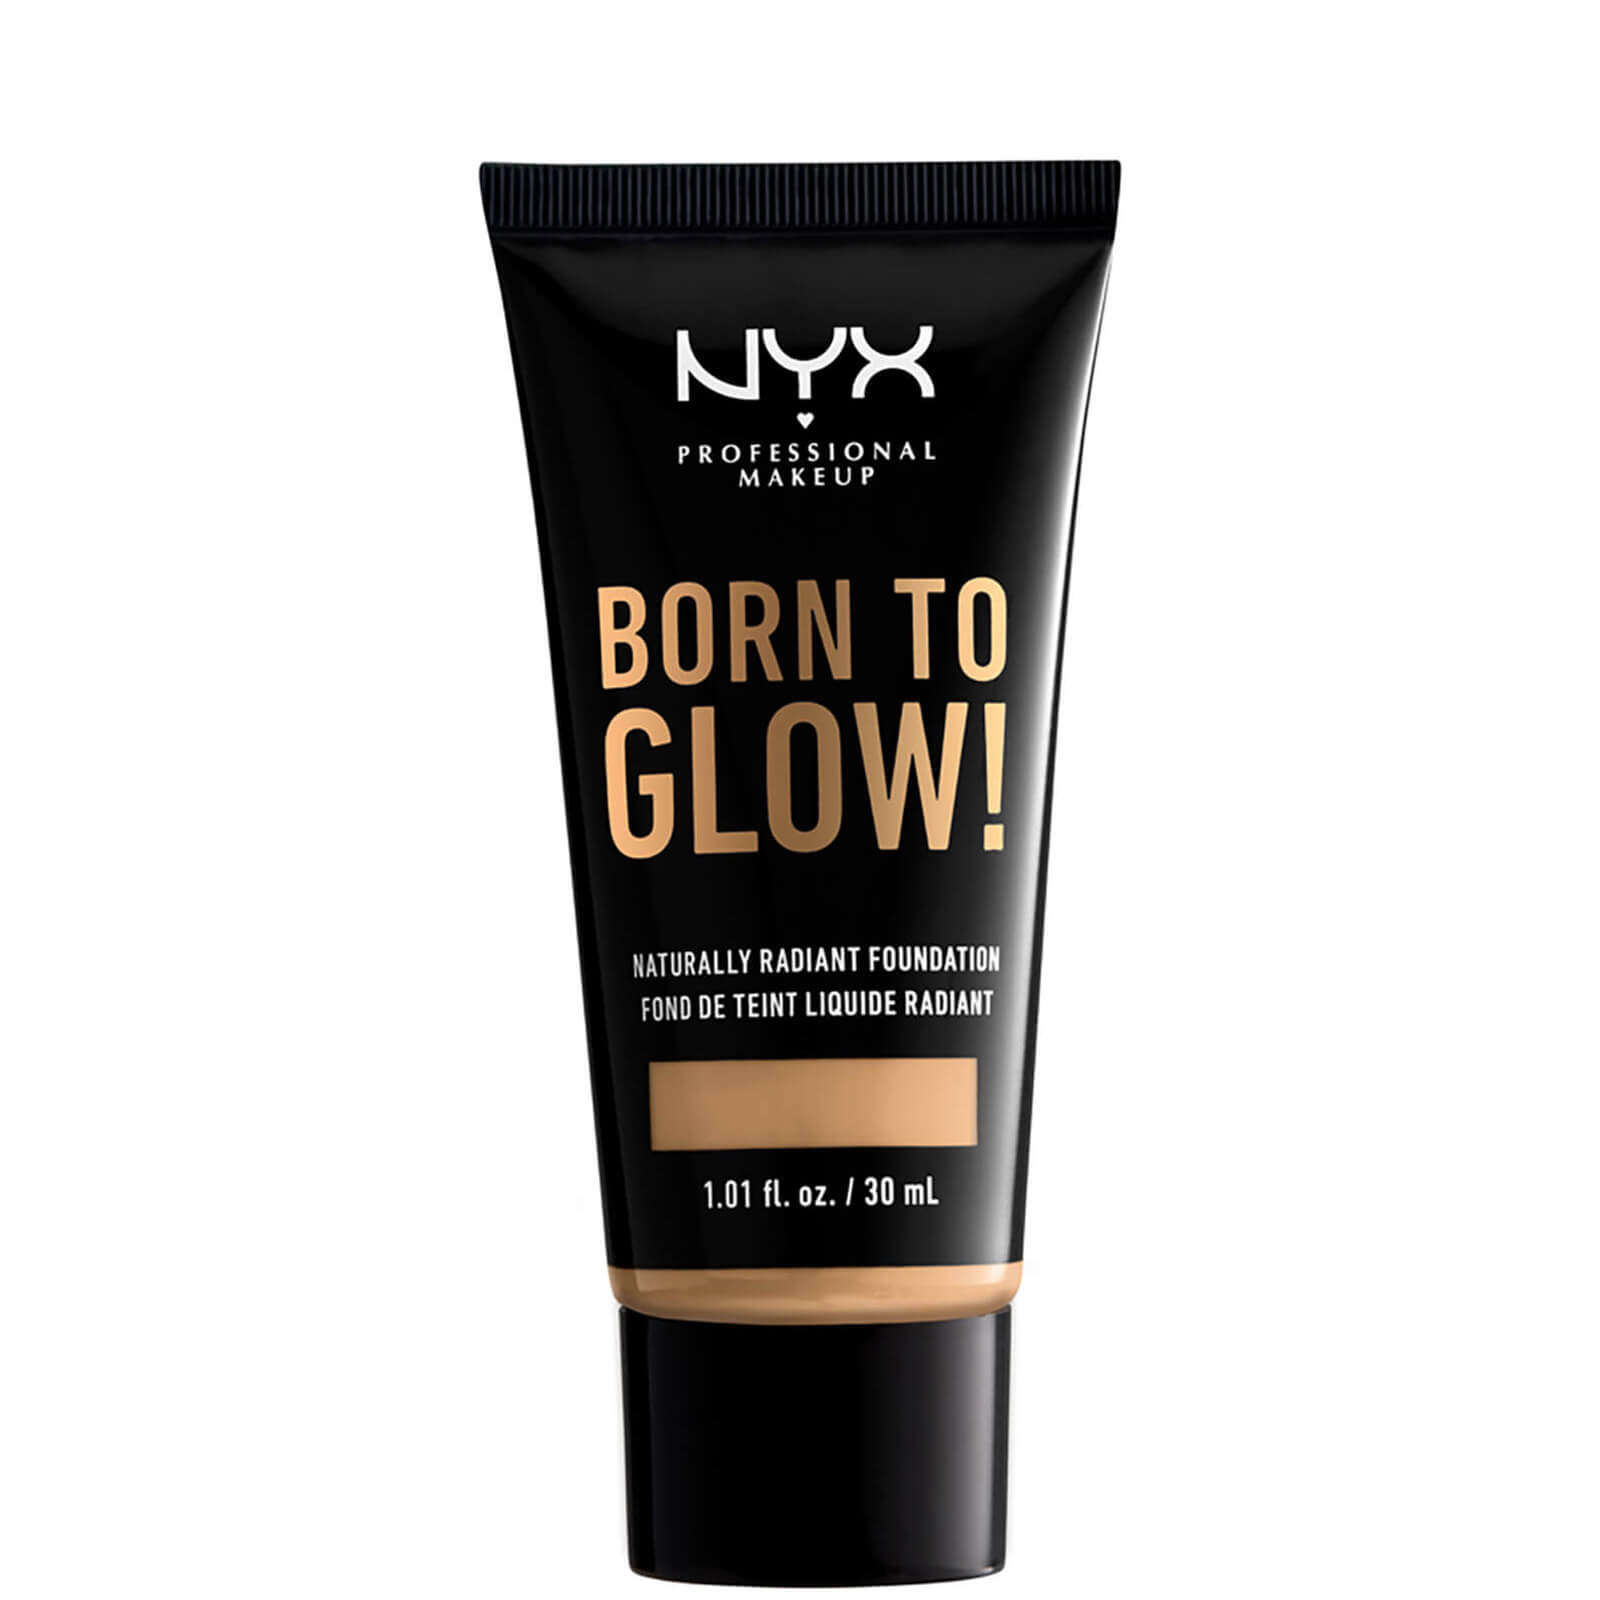 NYX Professional Makeup Born to Glow Naturally Radiant Foundation 30ml (Various Shades) - True Beige